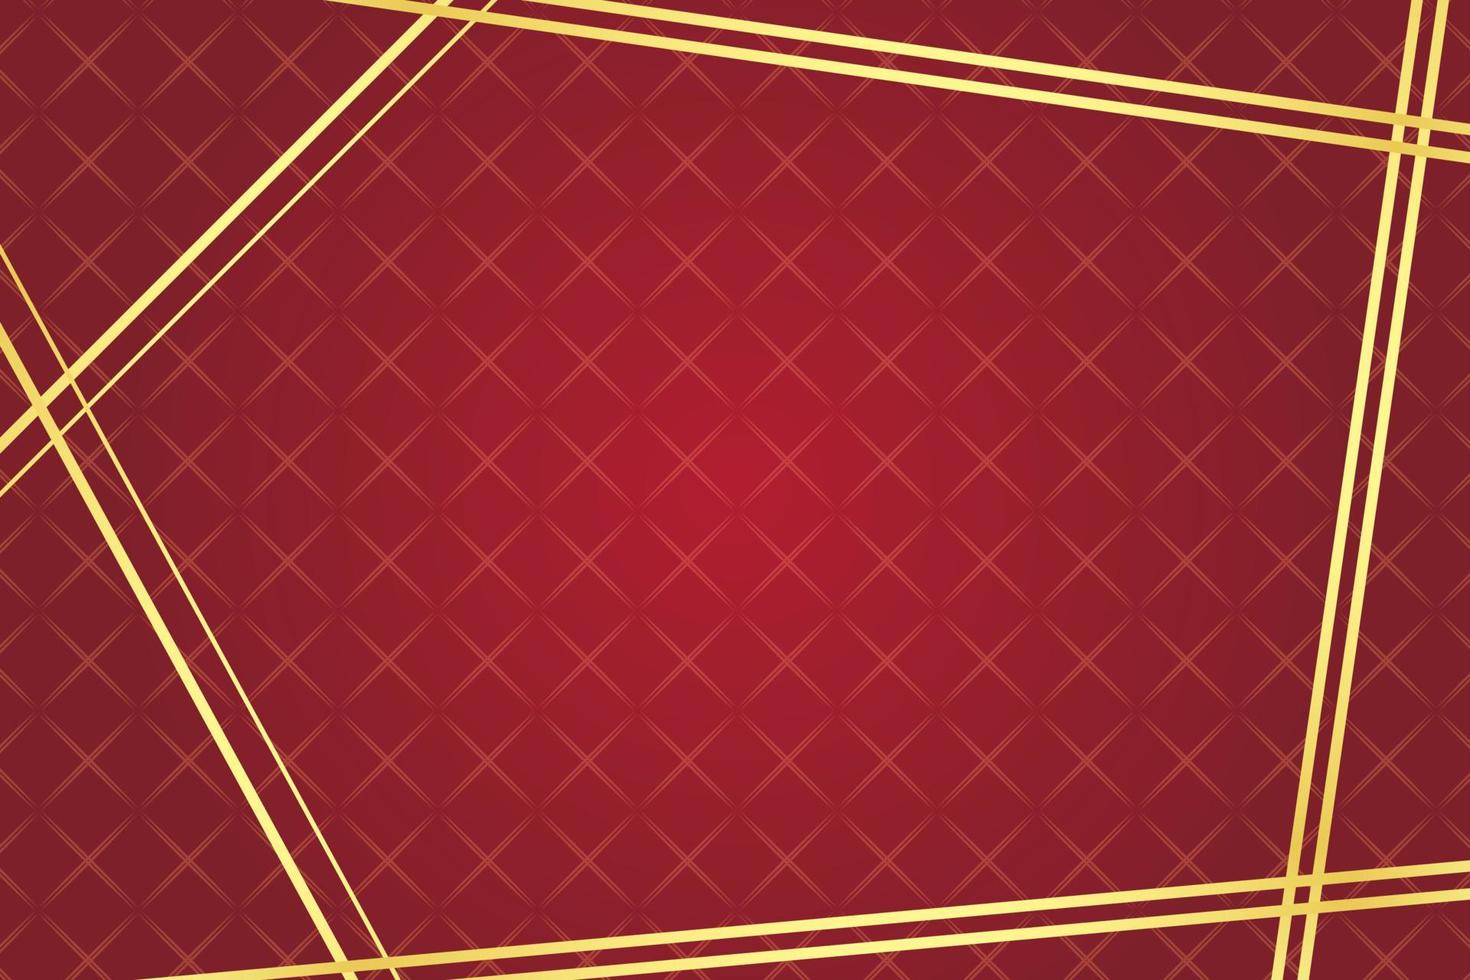 modern luxury abstract background with golden line elements gradient red background modern for design vector